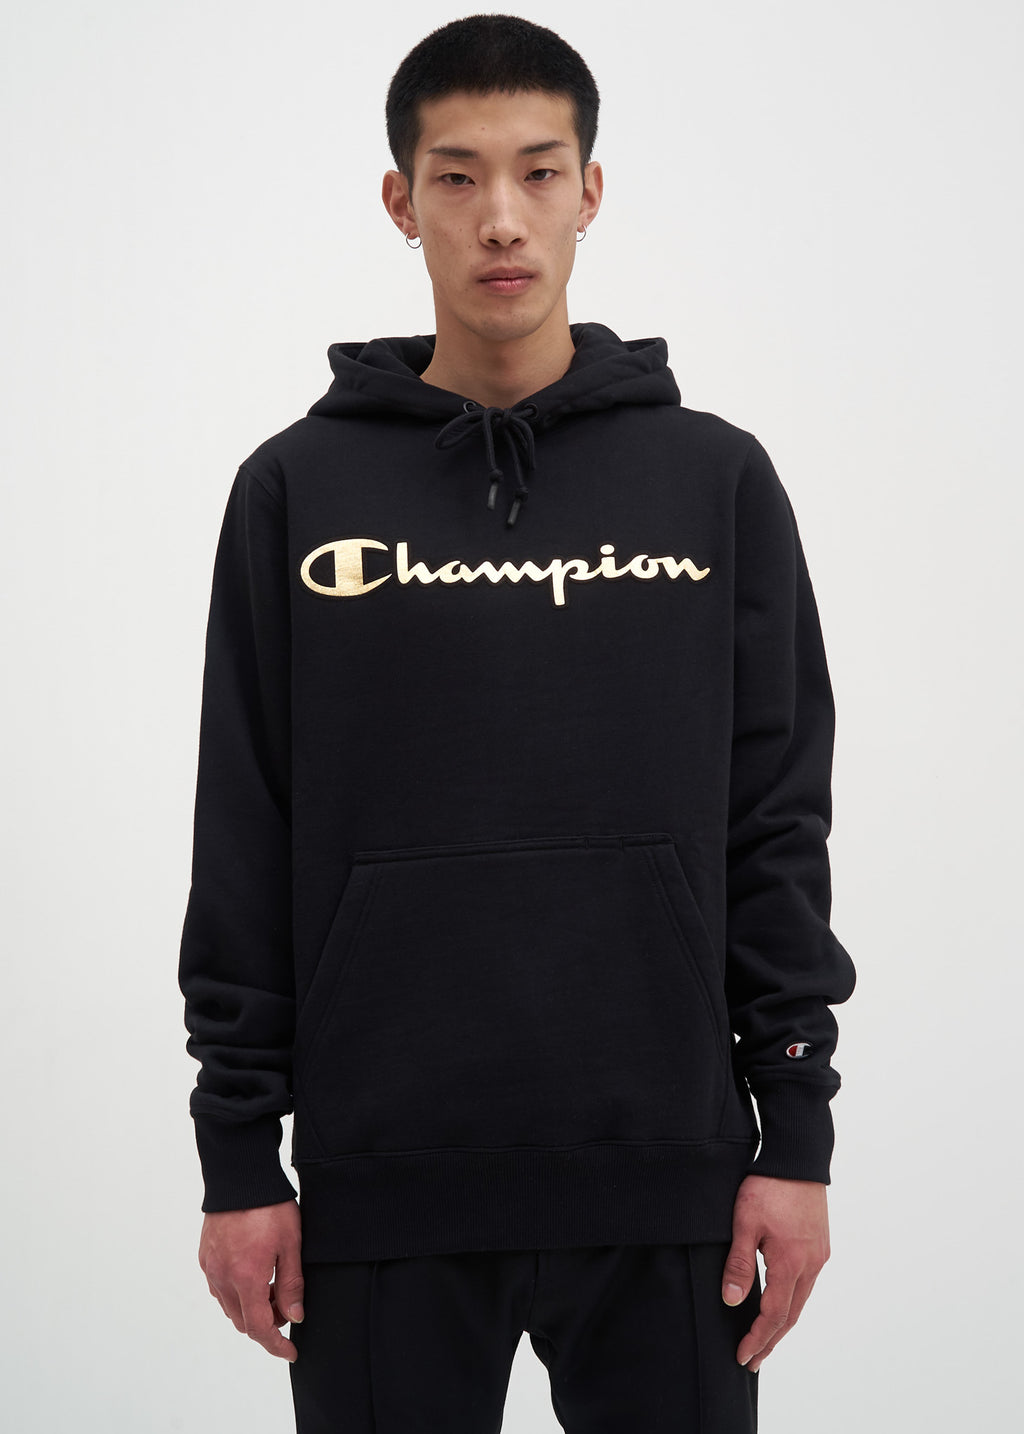 champion hoodie gold and black